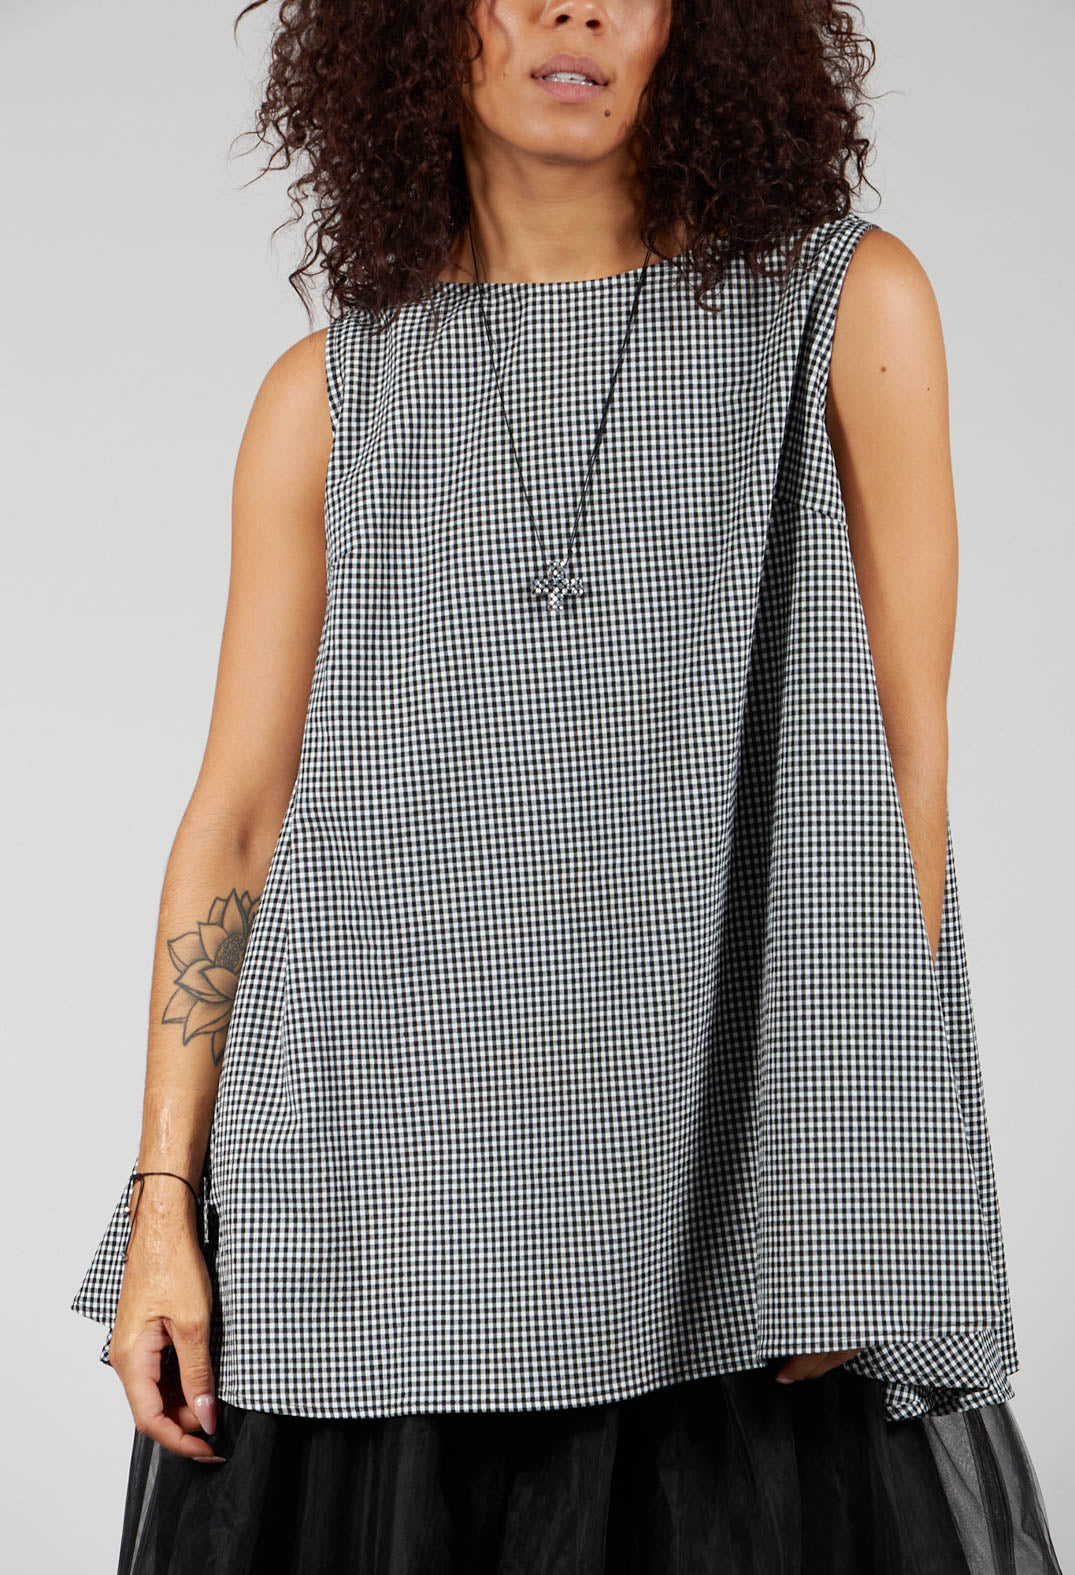 Swing Style Sleeveless Top in Black and White Check